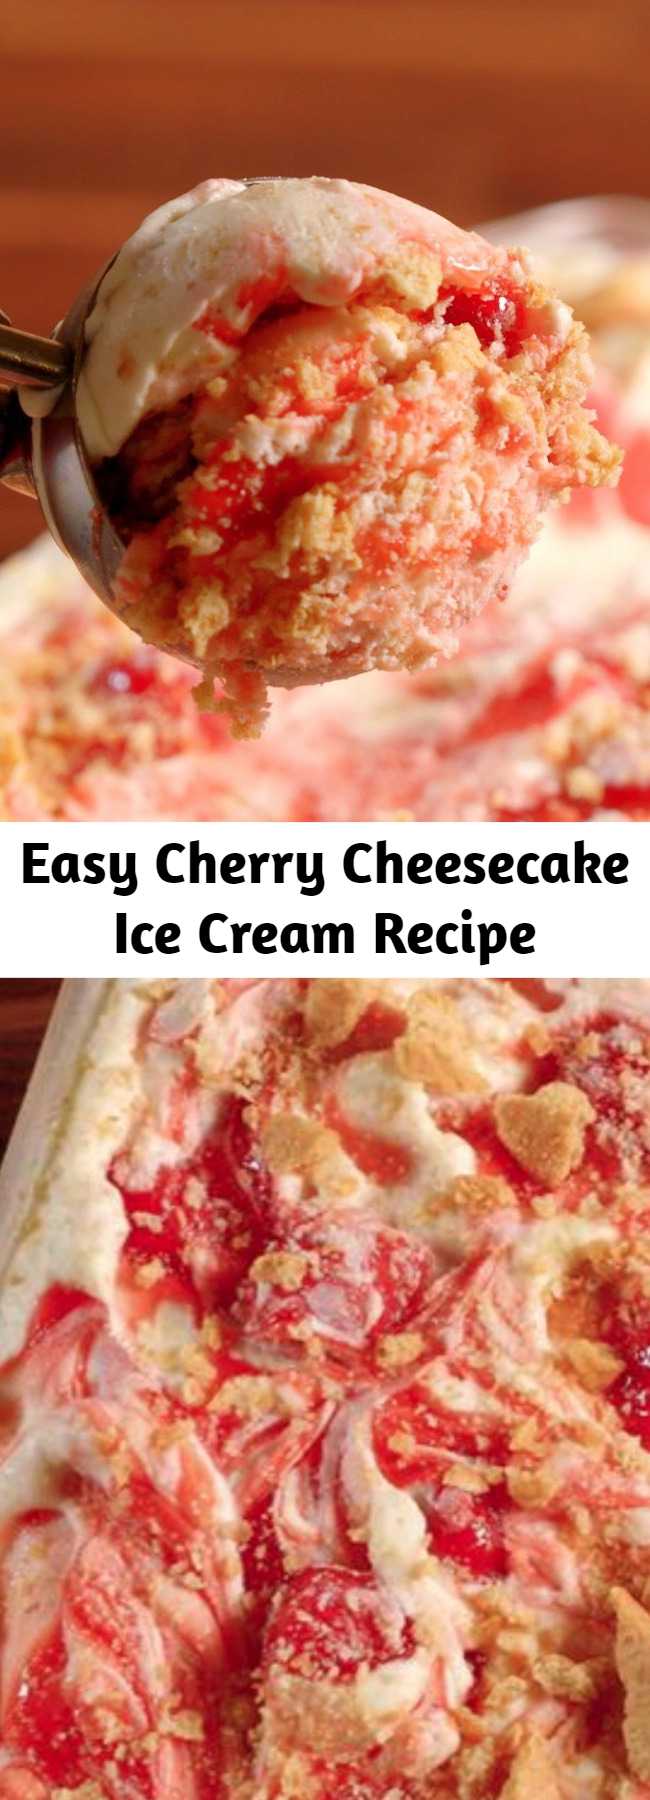 Easy Cherry Cheesecake Ice Cream Recipe - Check out this easy (no churn!) recipe for cherry cheesecake ice cream. It's even better than cherry pie a la mode!